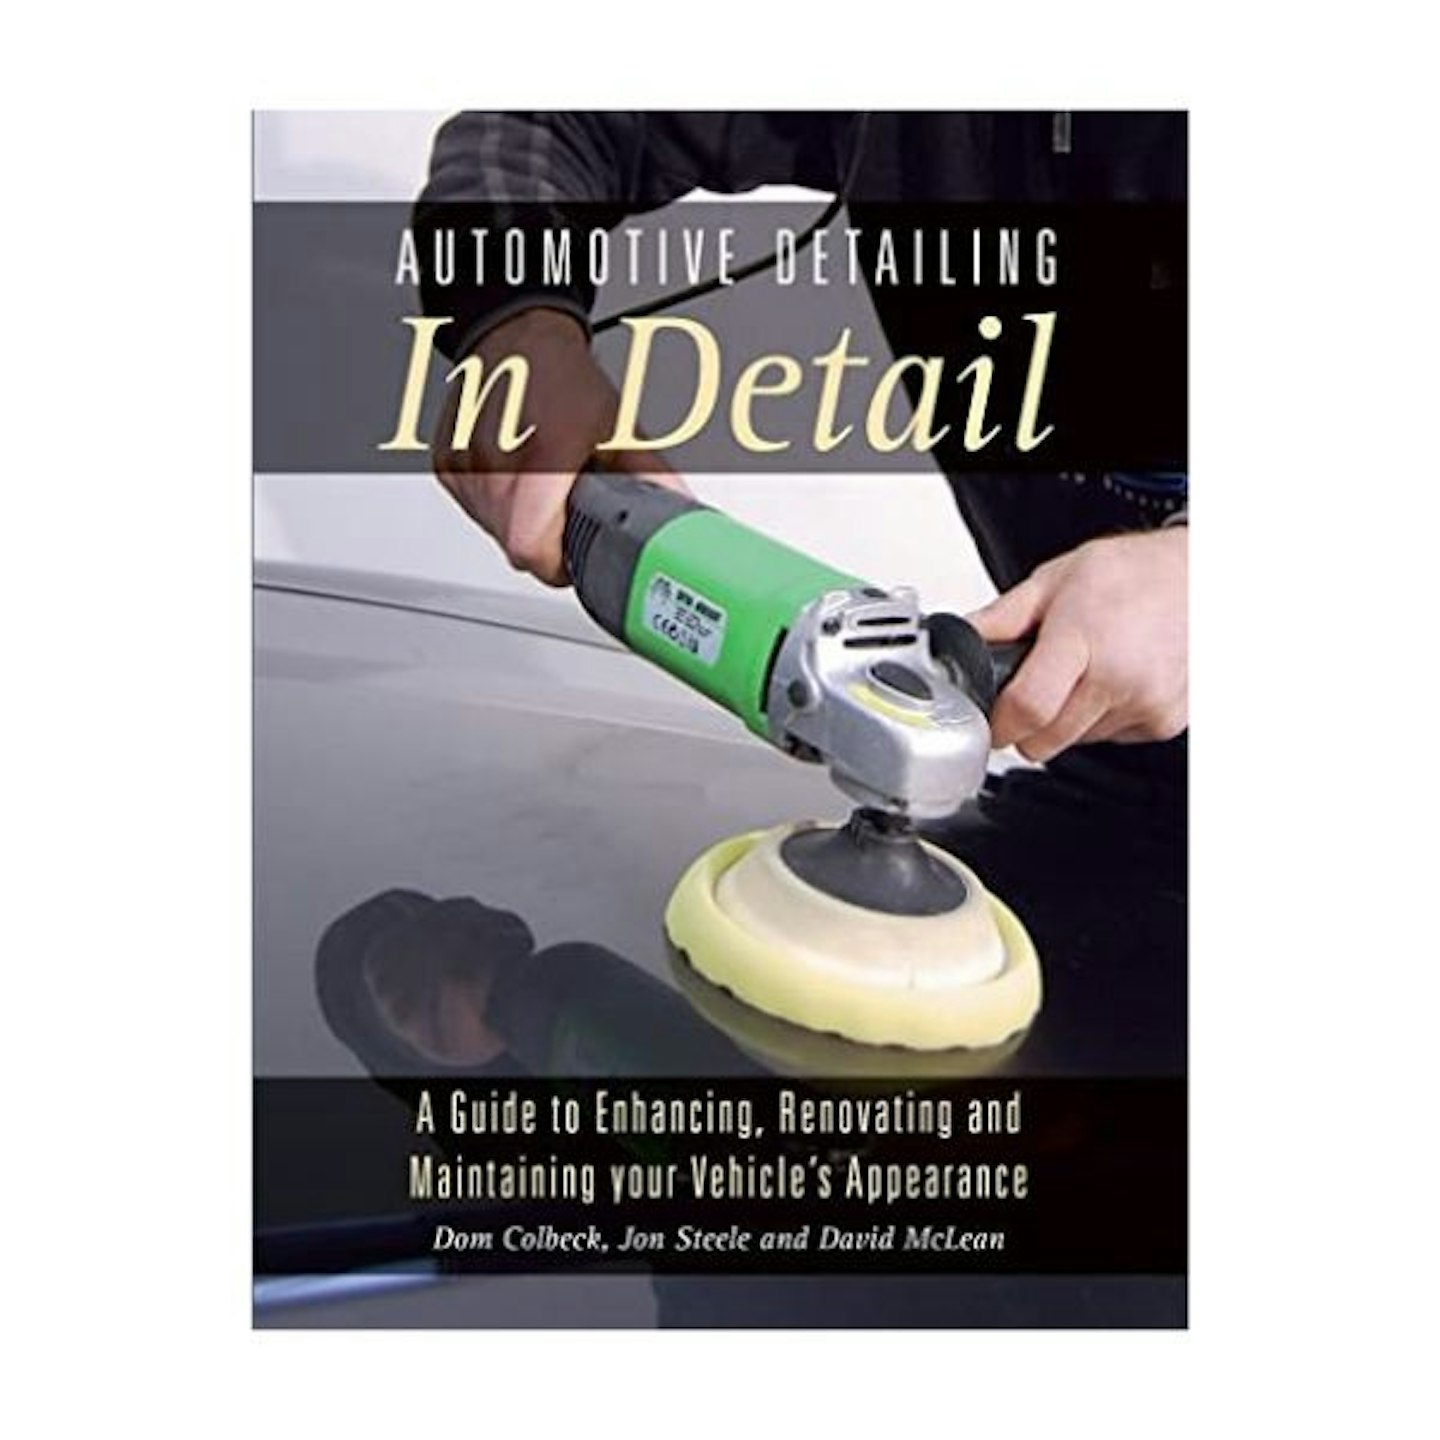 Automotive Detailing in Detail: A guide to enhancing, renovating and maintaining your vehicle's appearance